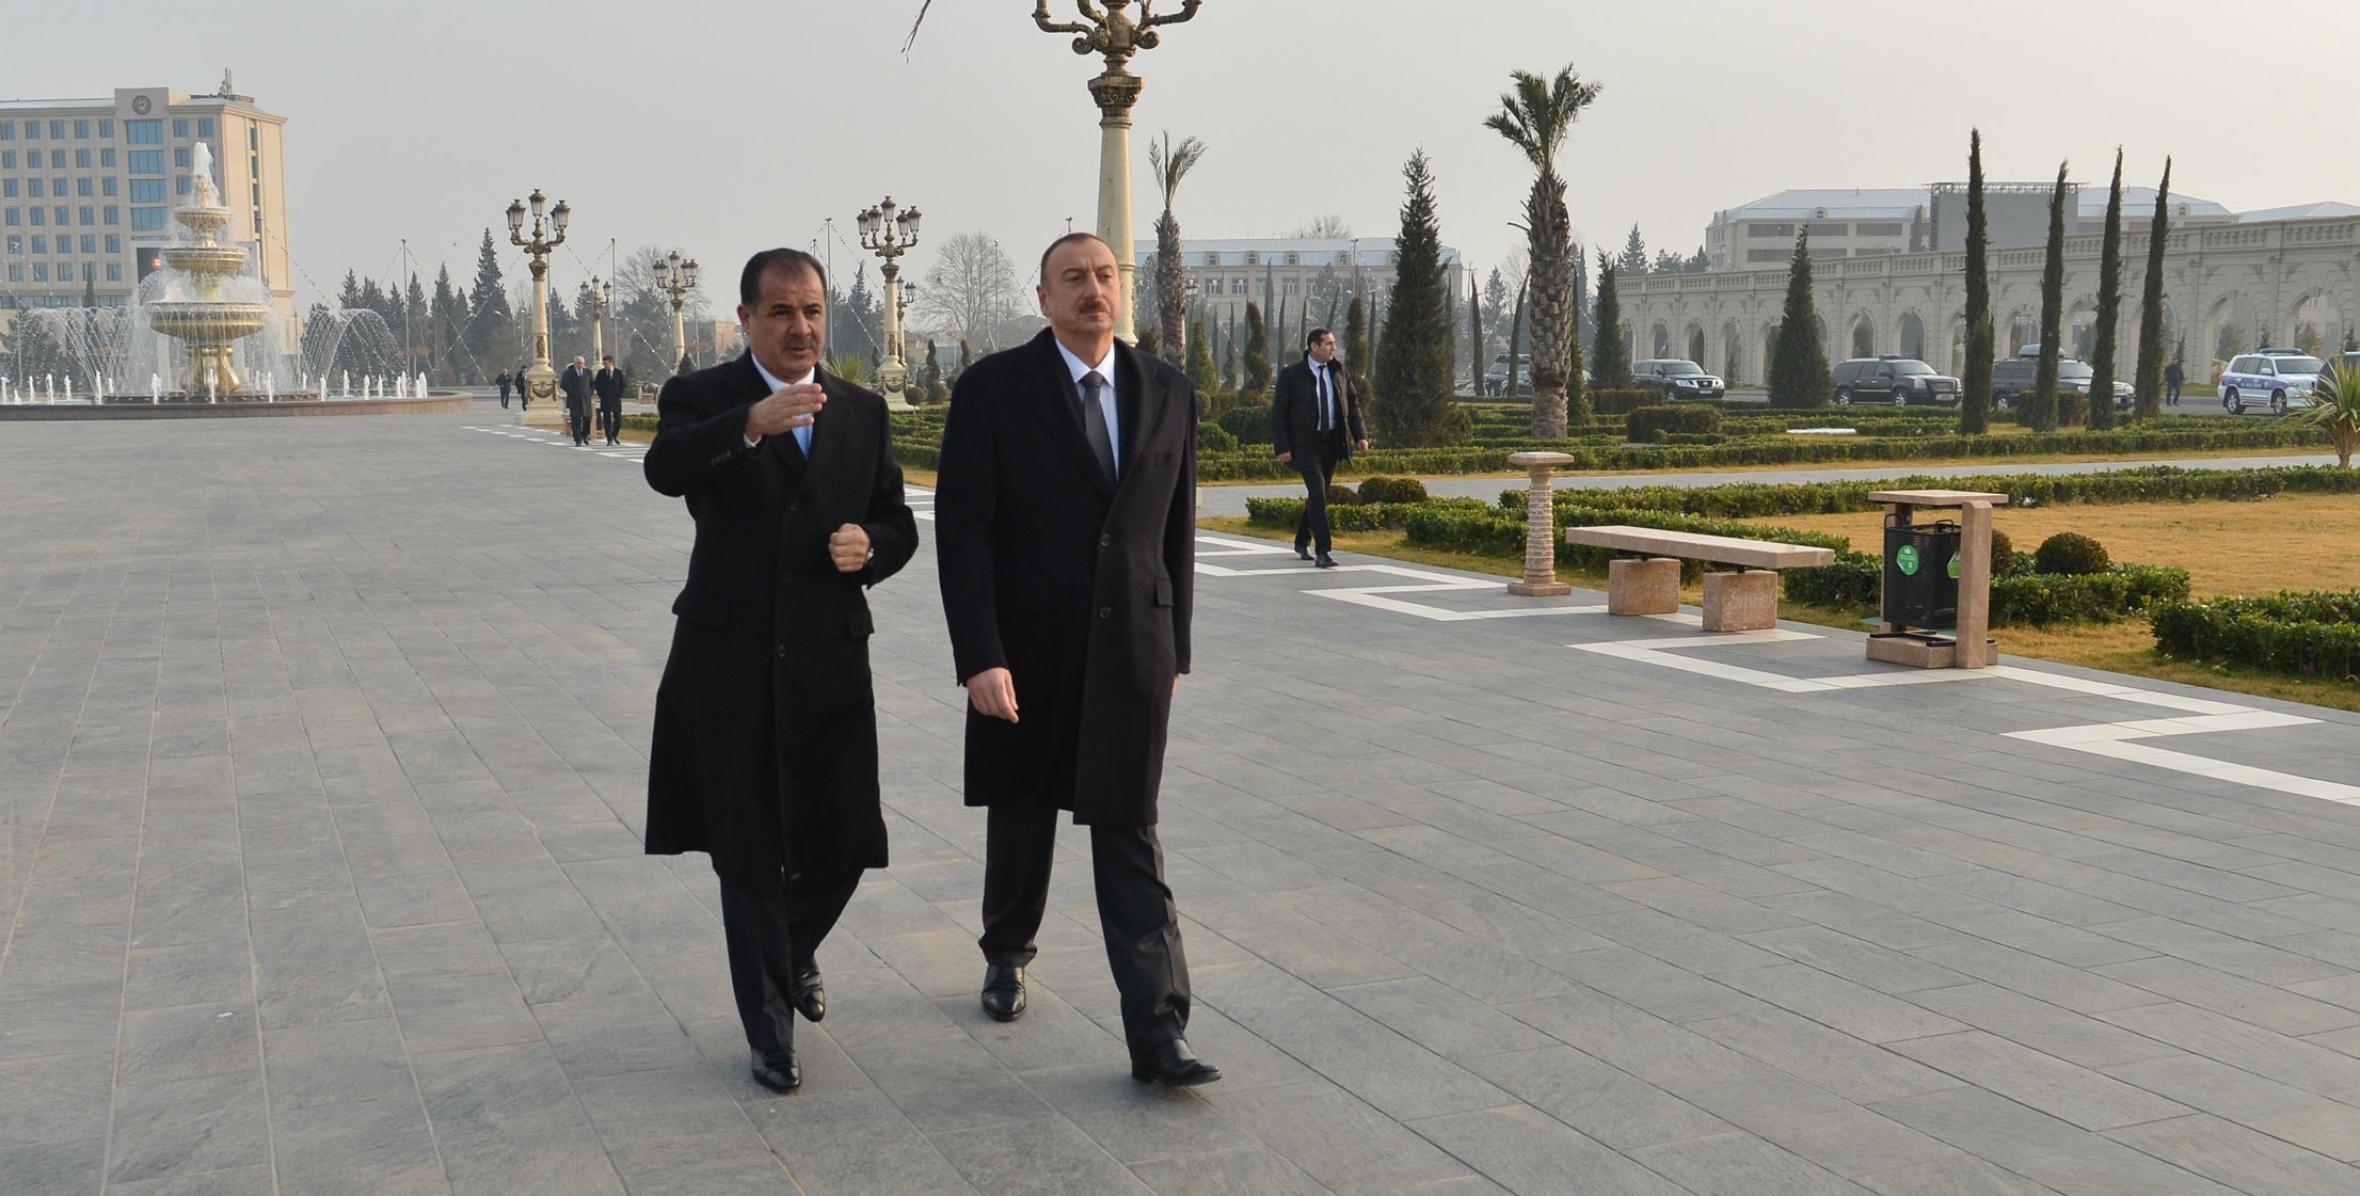 Ilham Aliyev attended the opening of the Heydar Aliyev Park Complex and the Heydar Aliyev Center in Ganja